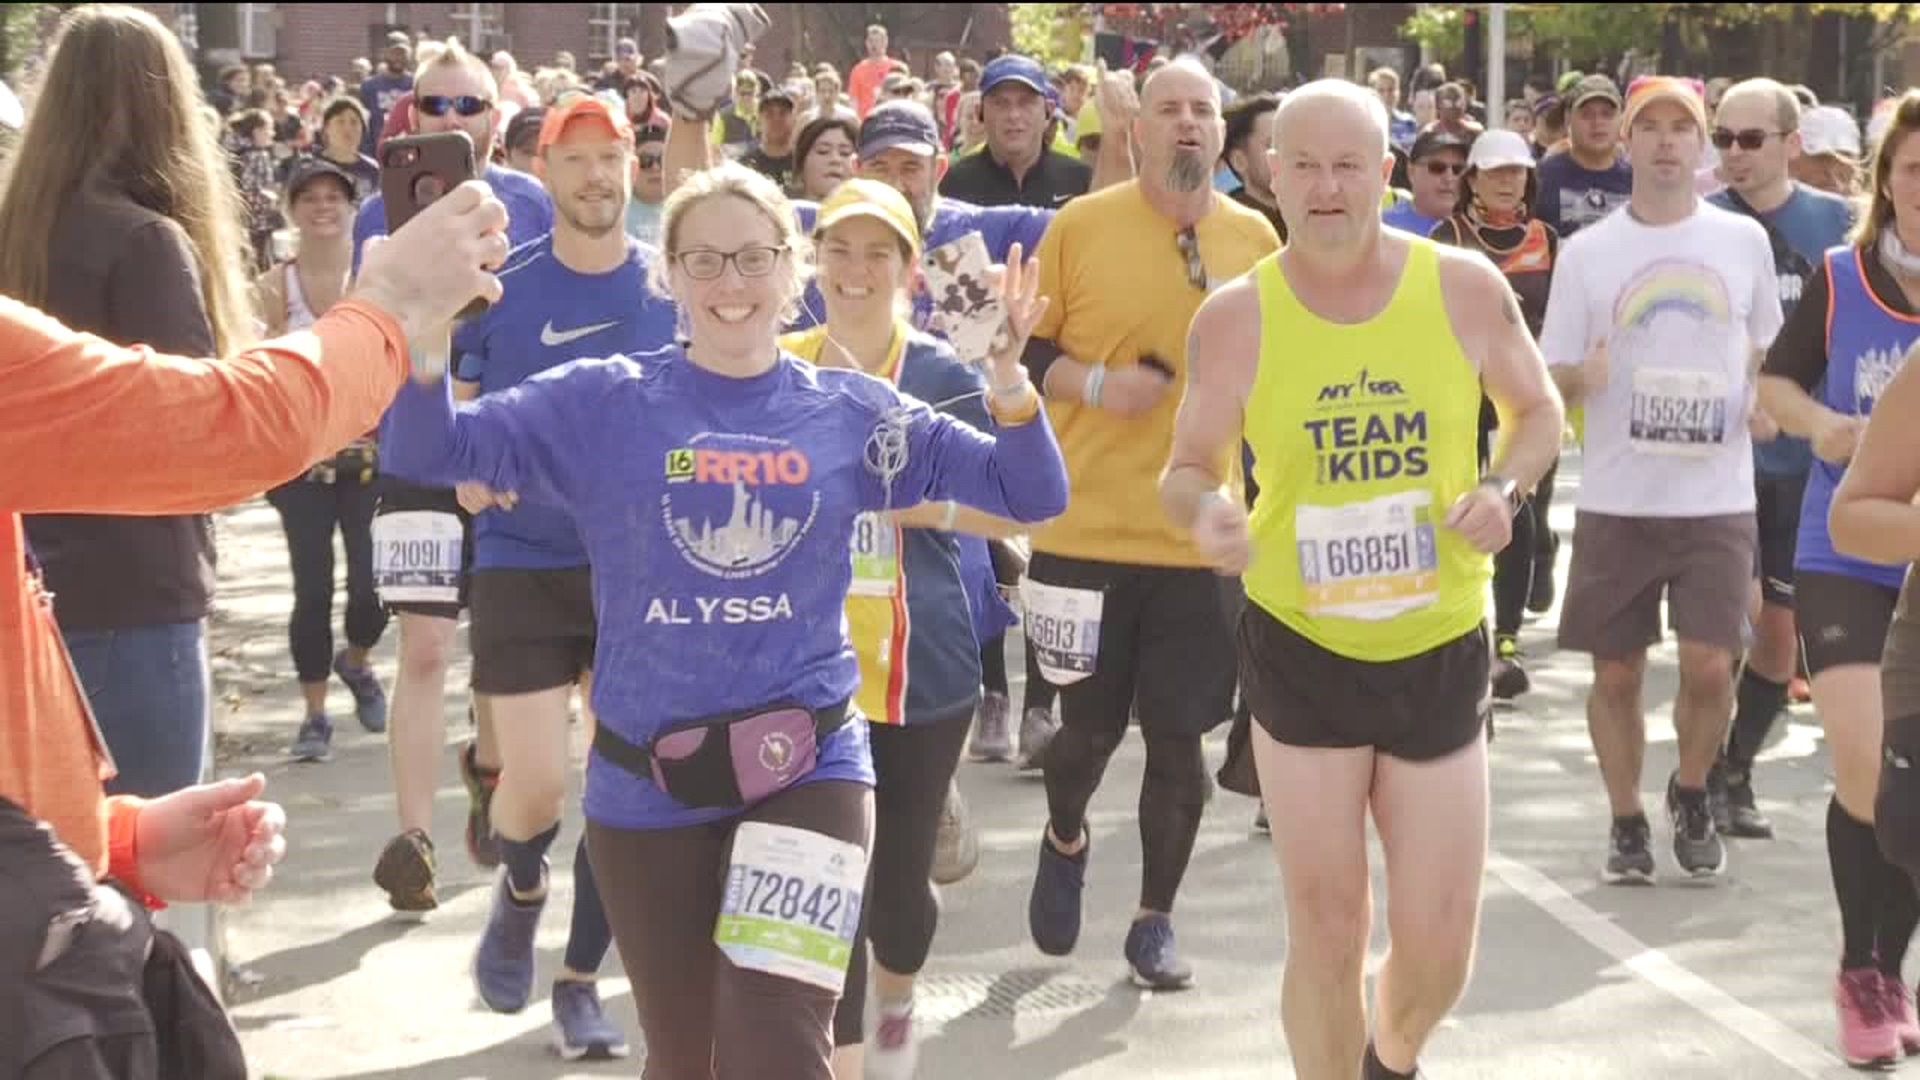 Our Charity Team Tackles the NYC Marathon